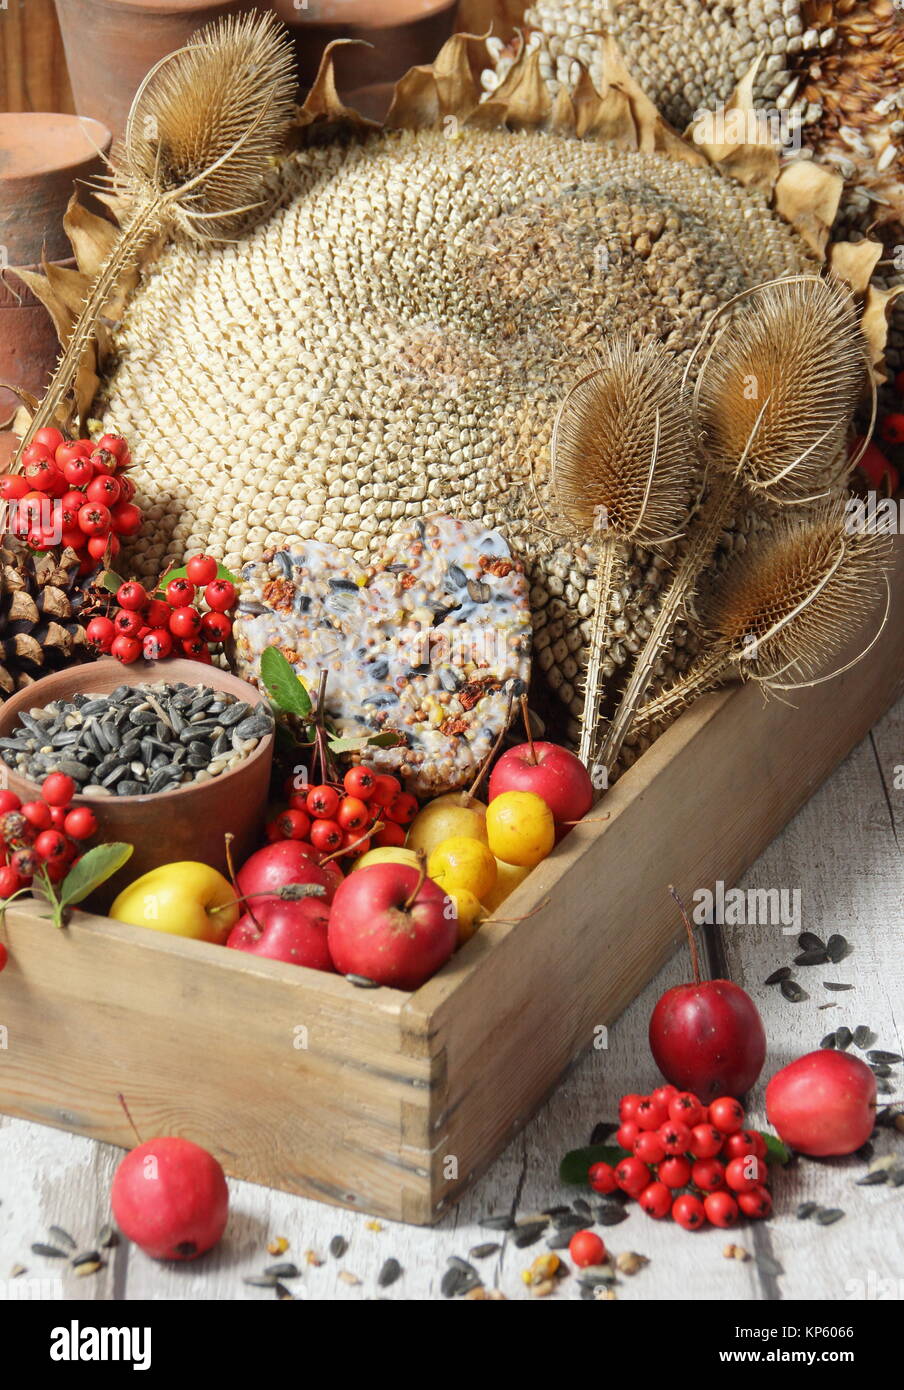 Bird food buffet ingredients including crab apples, sunflower seeds, teasel seed heads, pyracantha berries and a suet cake  gathered in a wooden tray Stock Photo